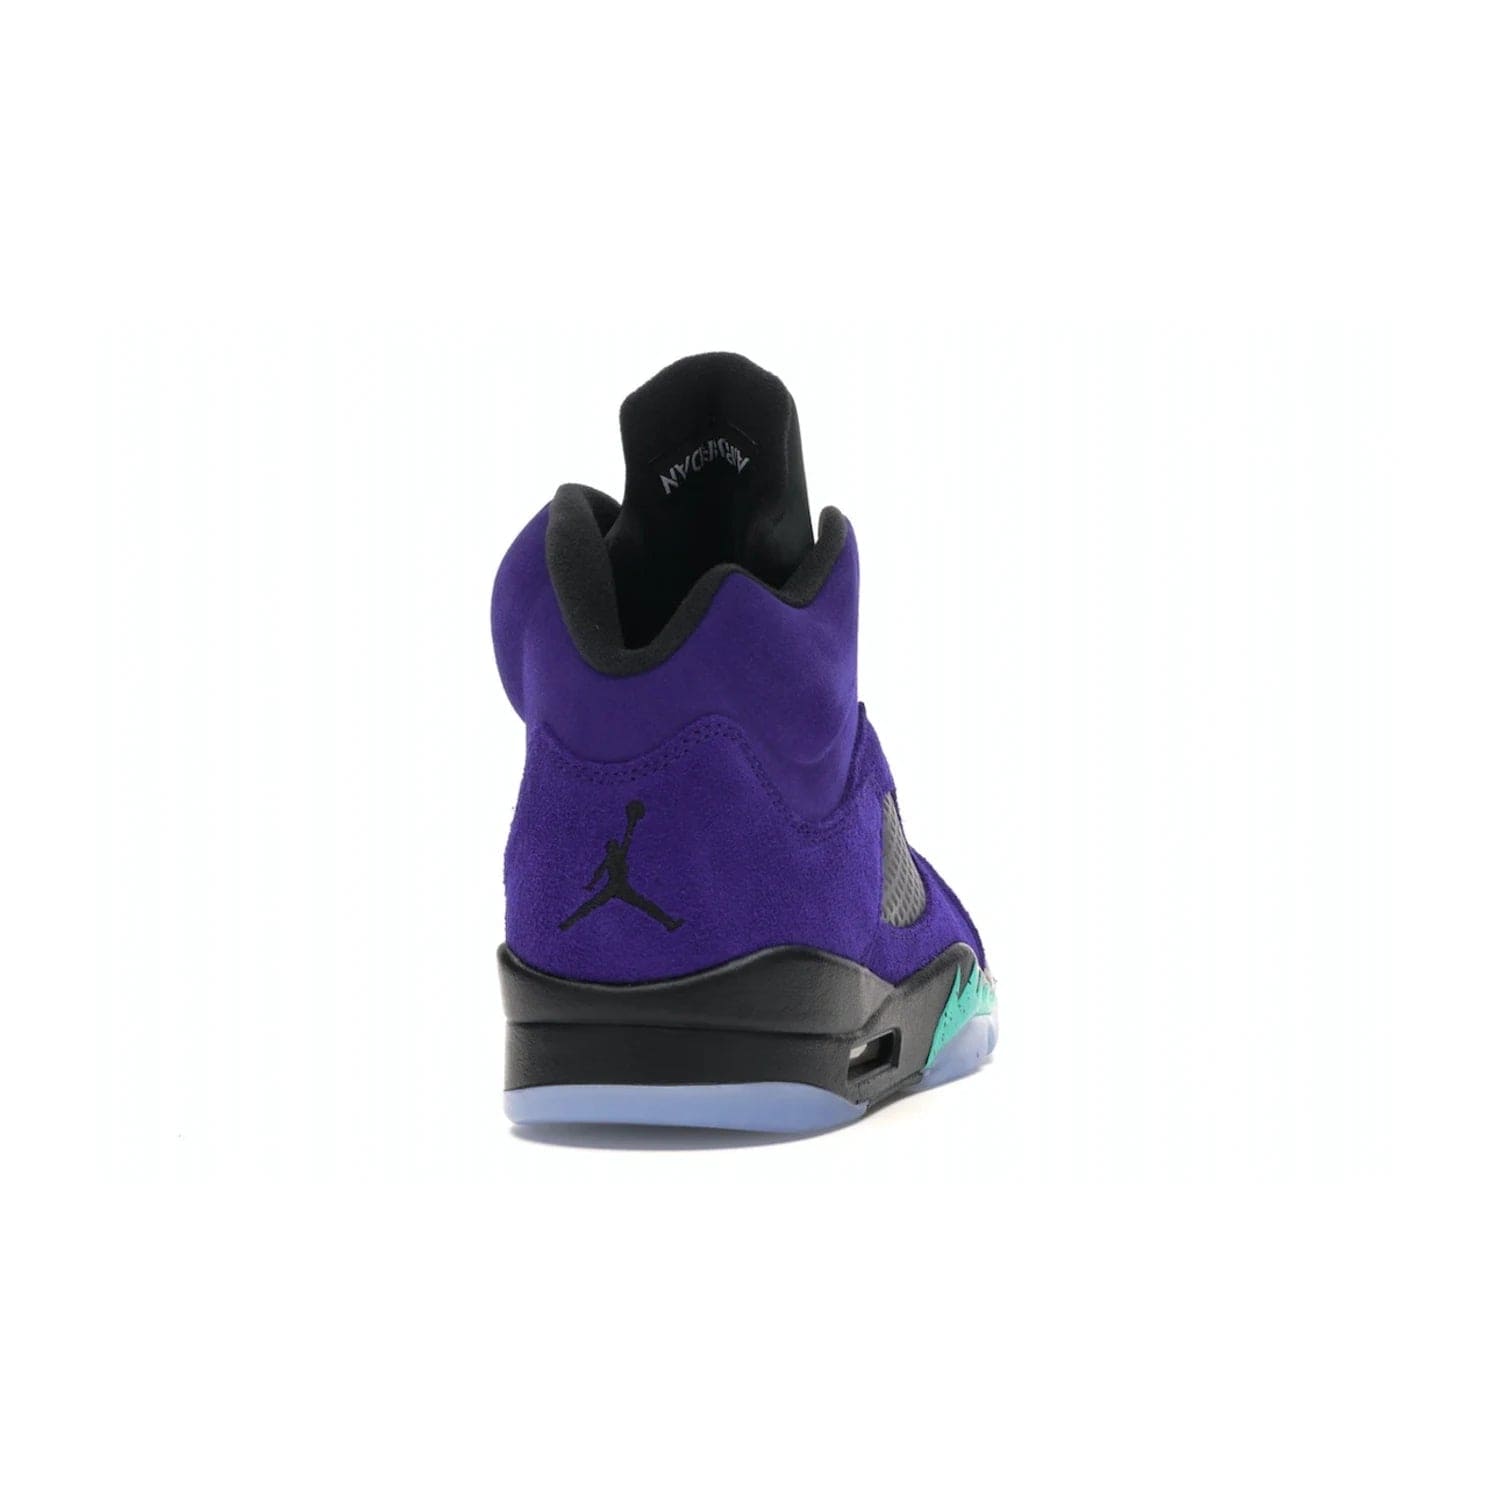 Jordan 5 Retro Alternate Grape - Image 29 - Only at www.BallersClubKickz.com - Bring the classic Jordan 5 Retro Alternate Grape to your sneaker collection! Featuring a purple suede upper, charcoal underlays, green detailing, and an icy and green outsole. Releasing for the first time since 1990, don't miss this chance to add a piece of sneaker history to your collection.